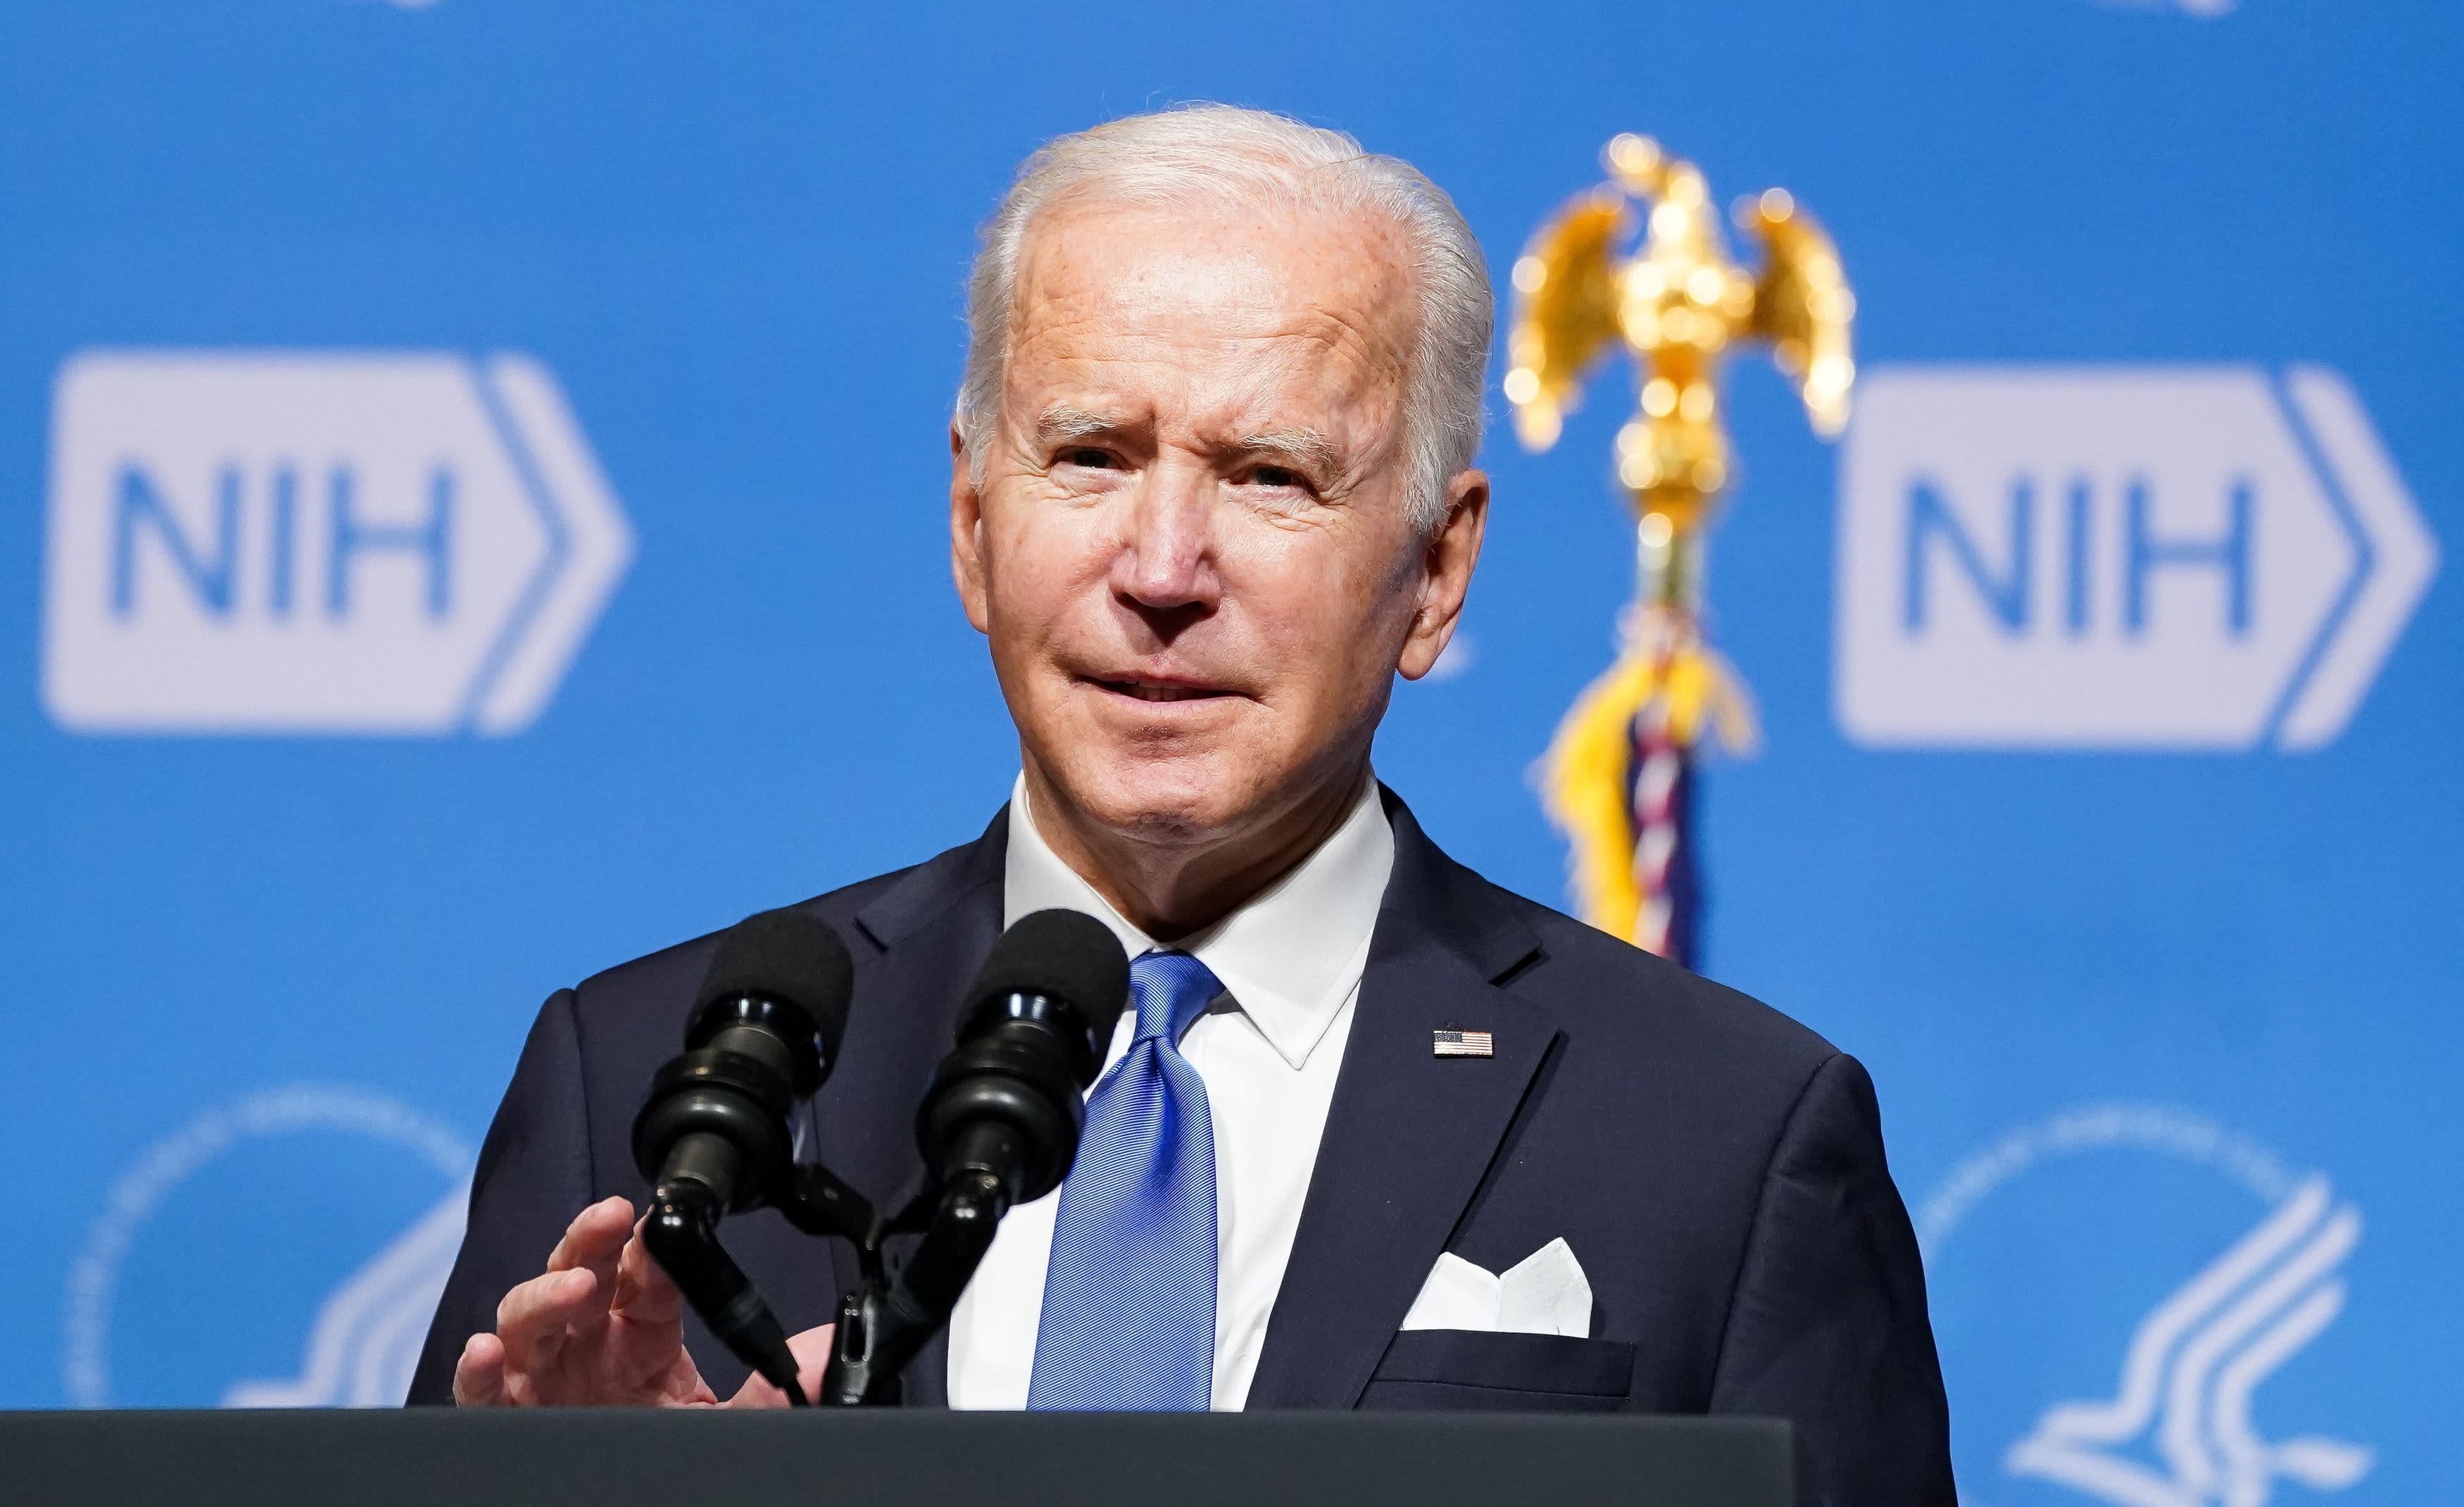 Biden says he doesn't want lockdowns and won't expand vaccine mandates to fight Covid this winter - CNBC